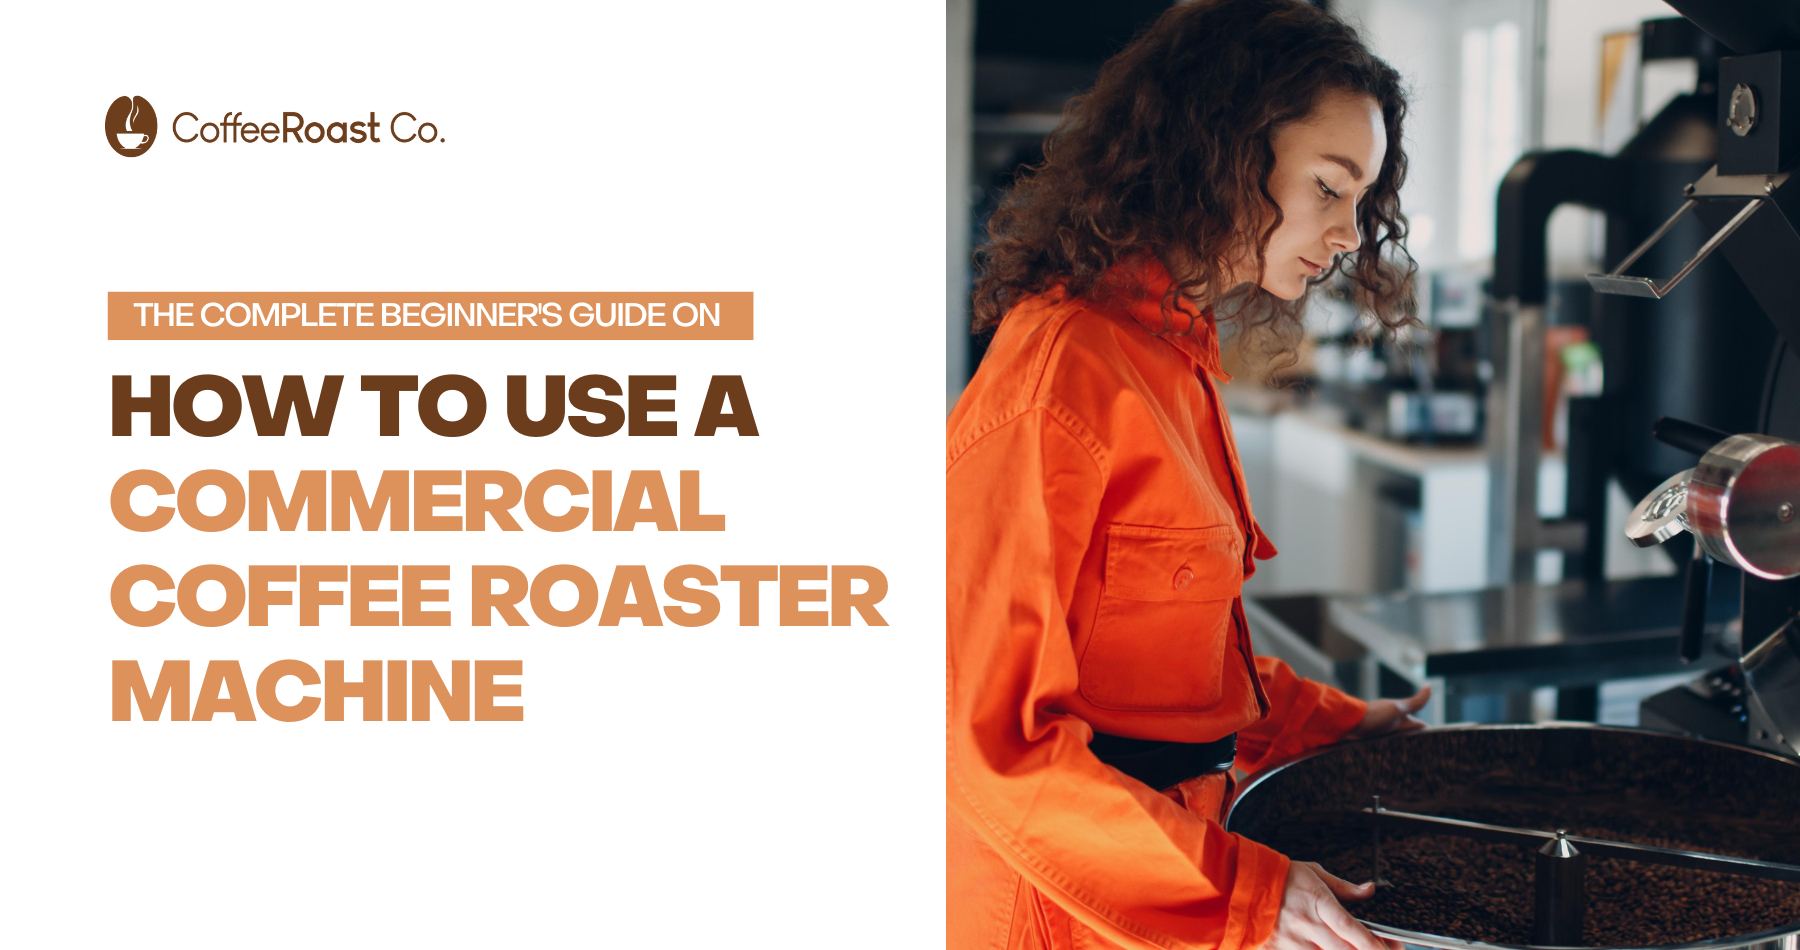 The Complete Beginner's Guide on How to Use a Commercial Coffee Roaster Machine